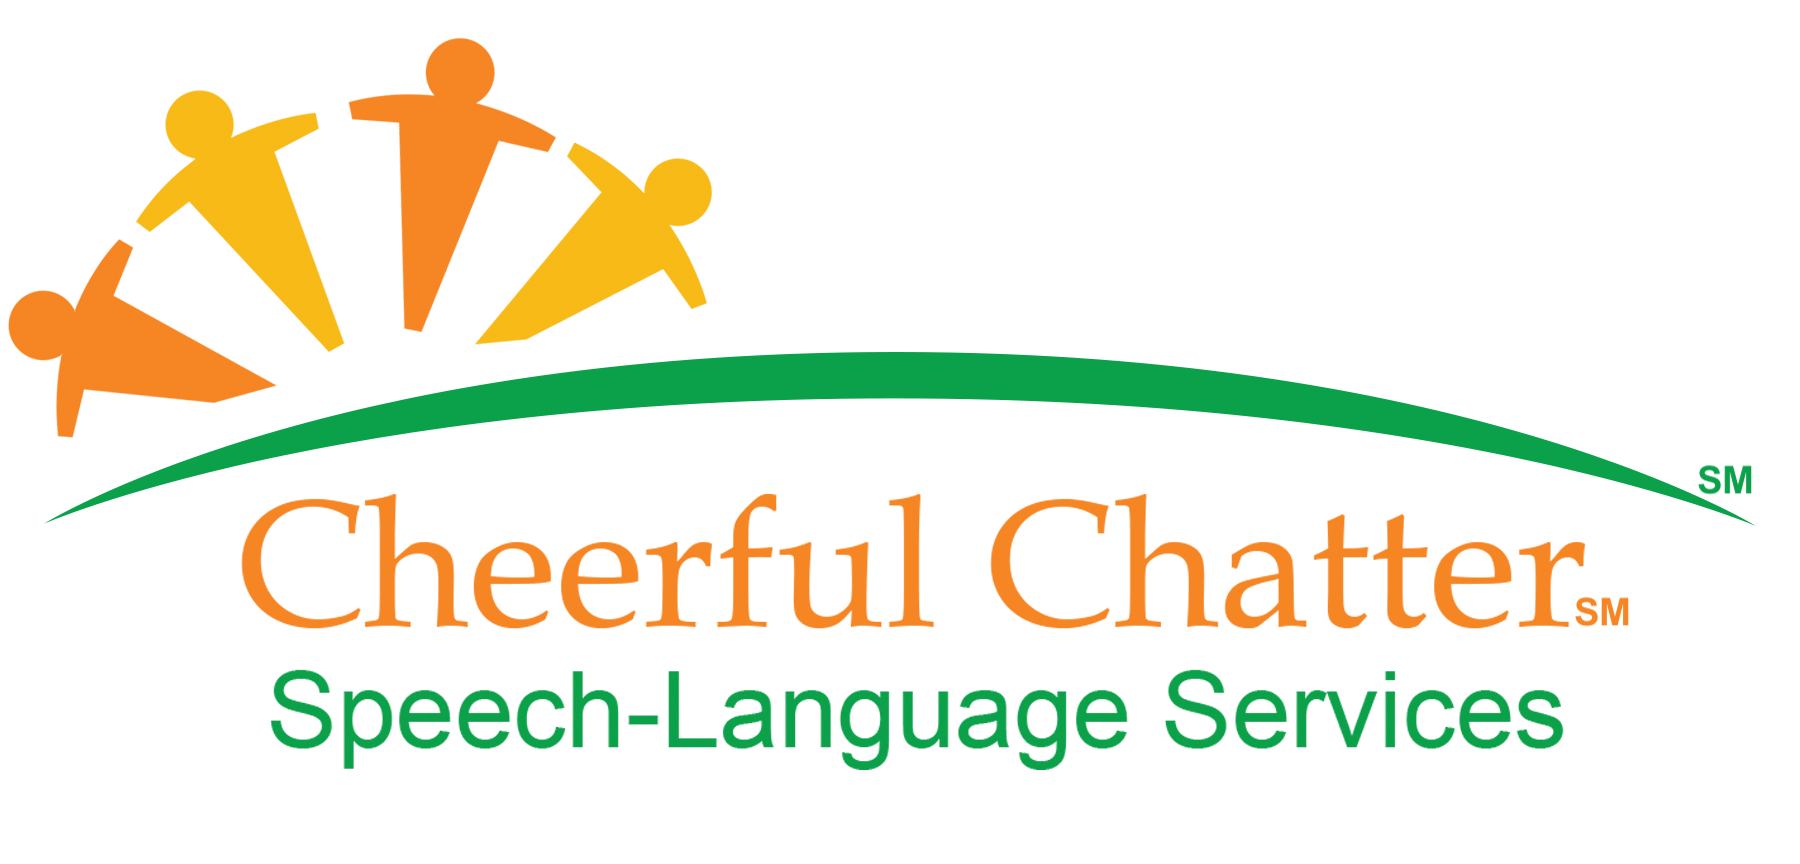 Speech Language Therapy at Cheerful Chatter